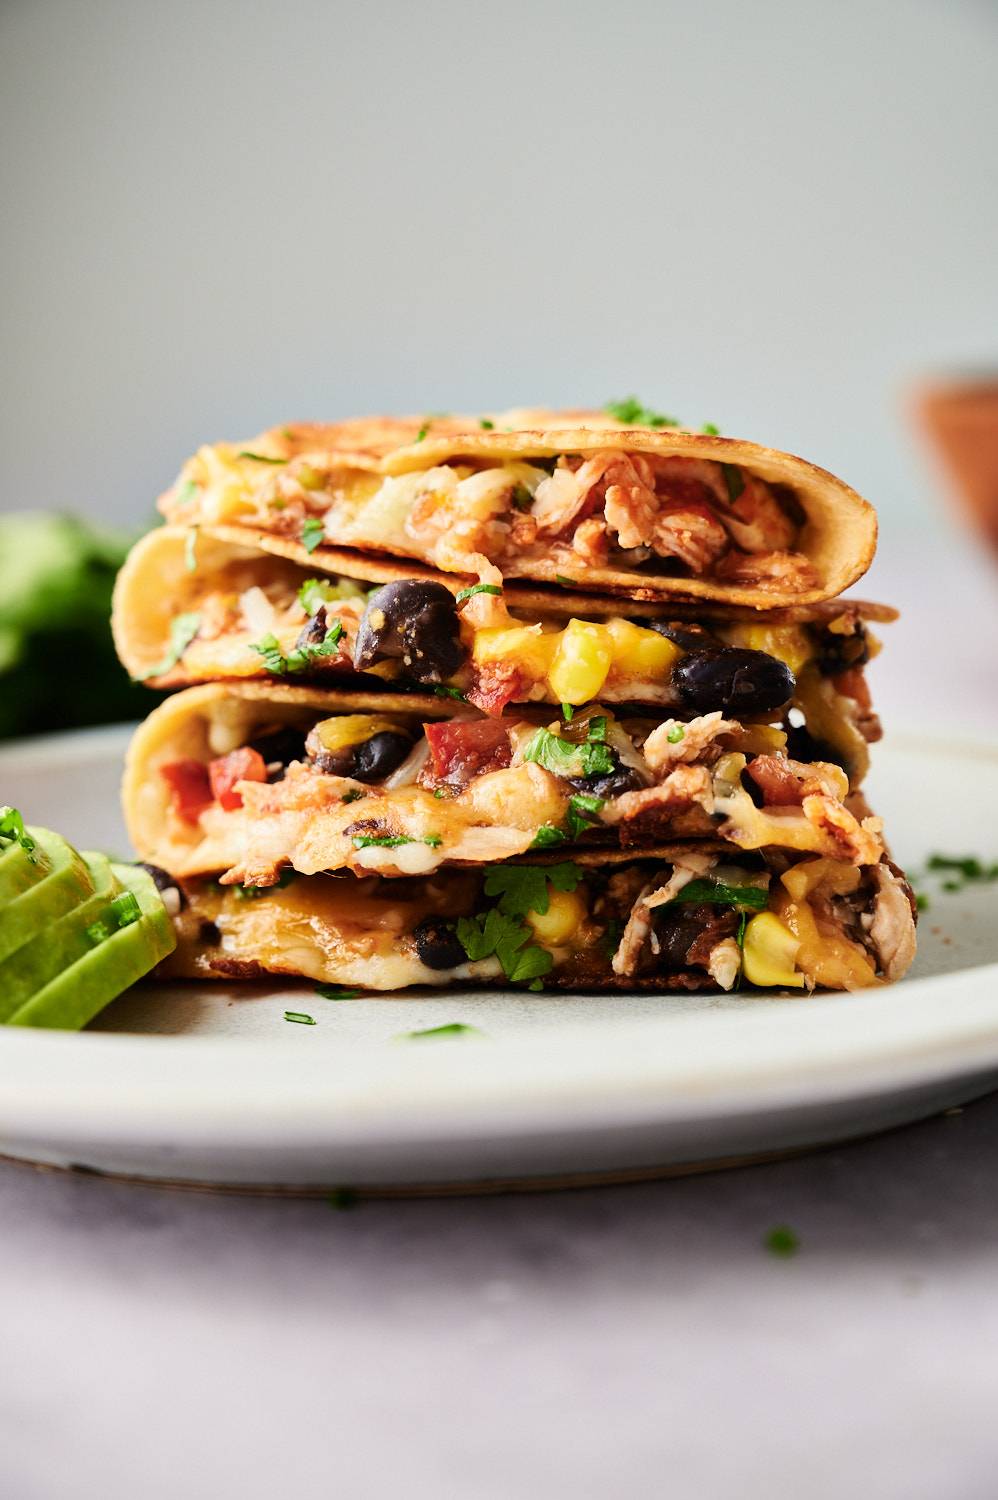 Chipotle chicken quesadillas with black beans and corn piled on a plate with avocado.